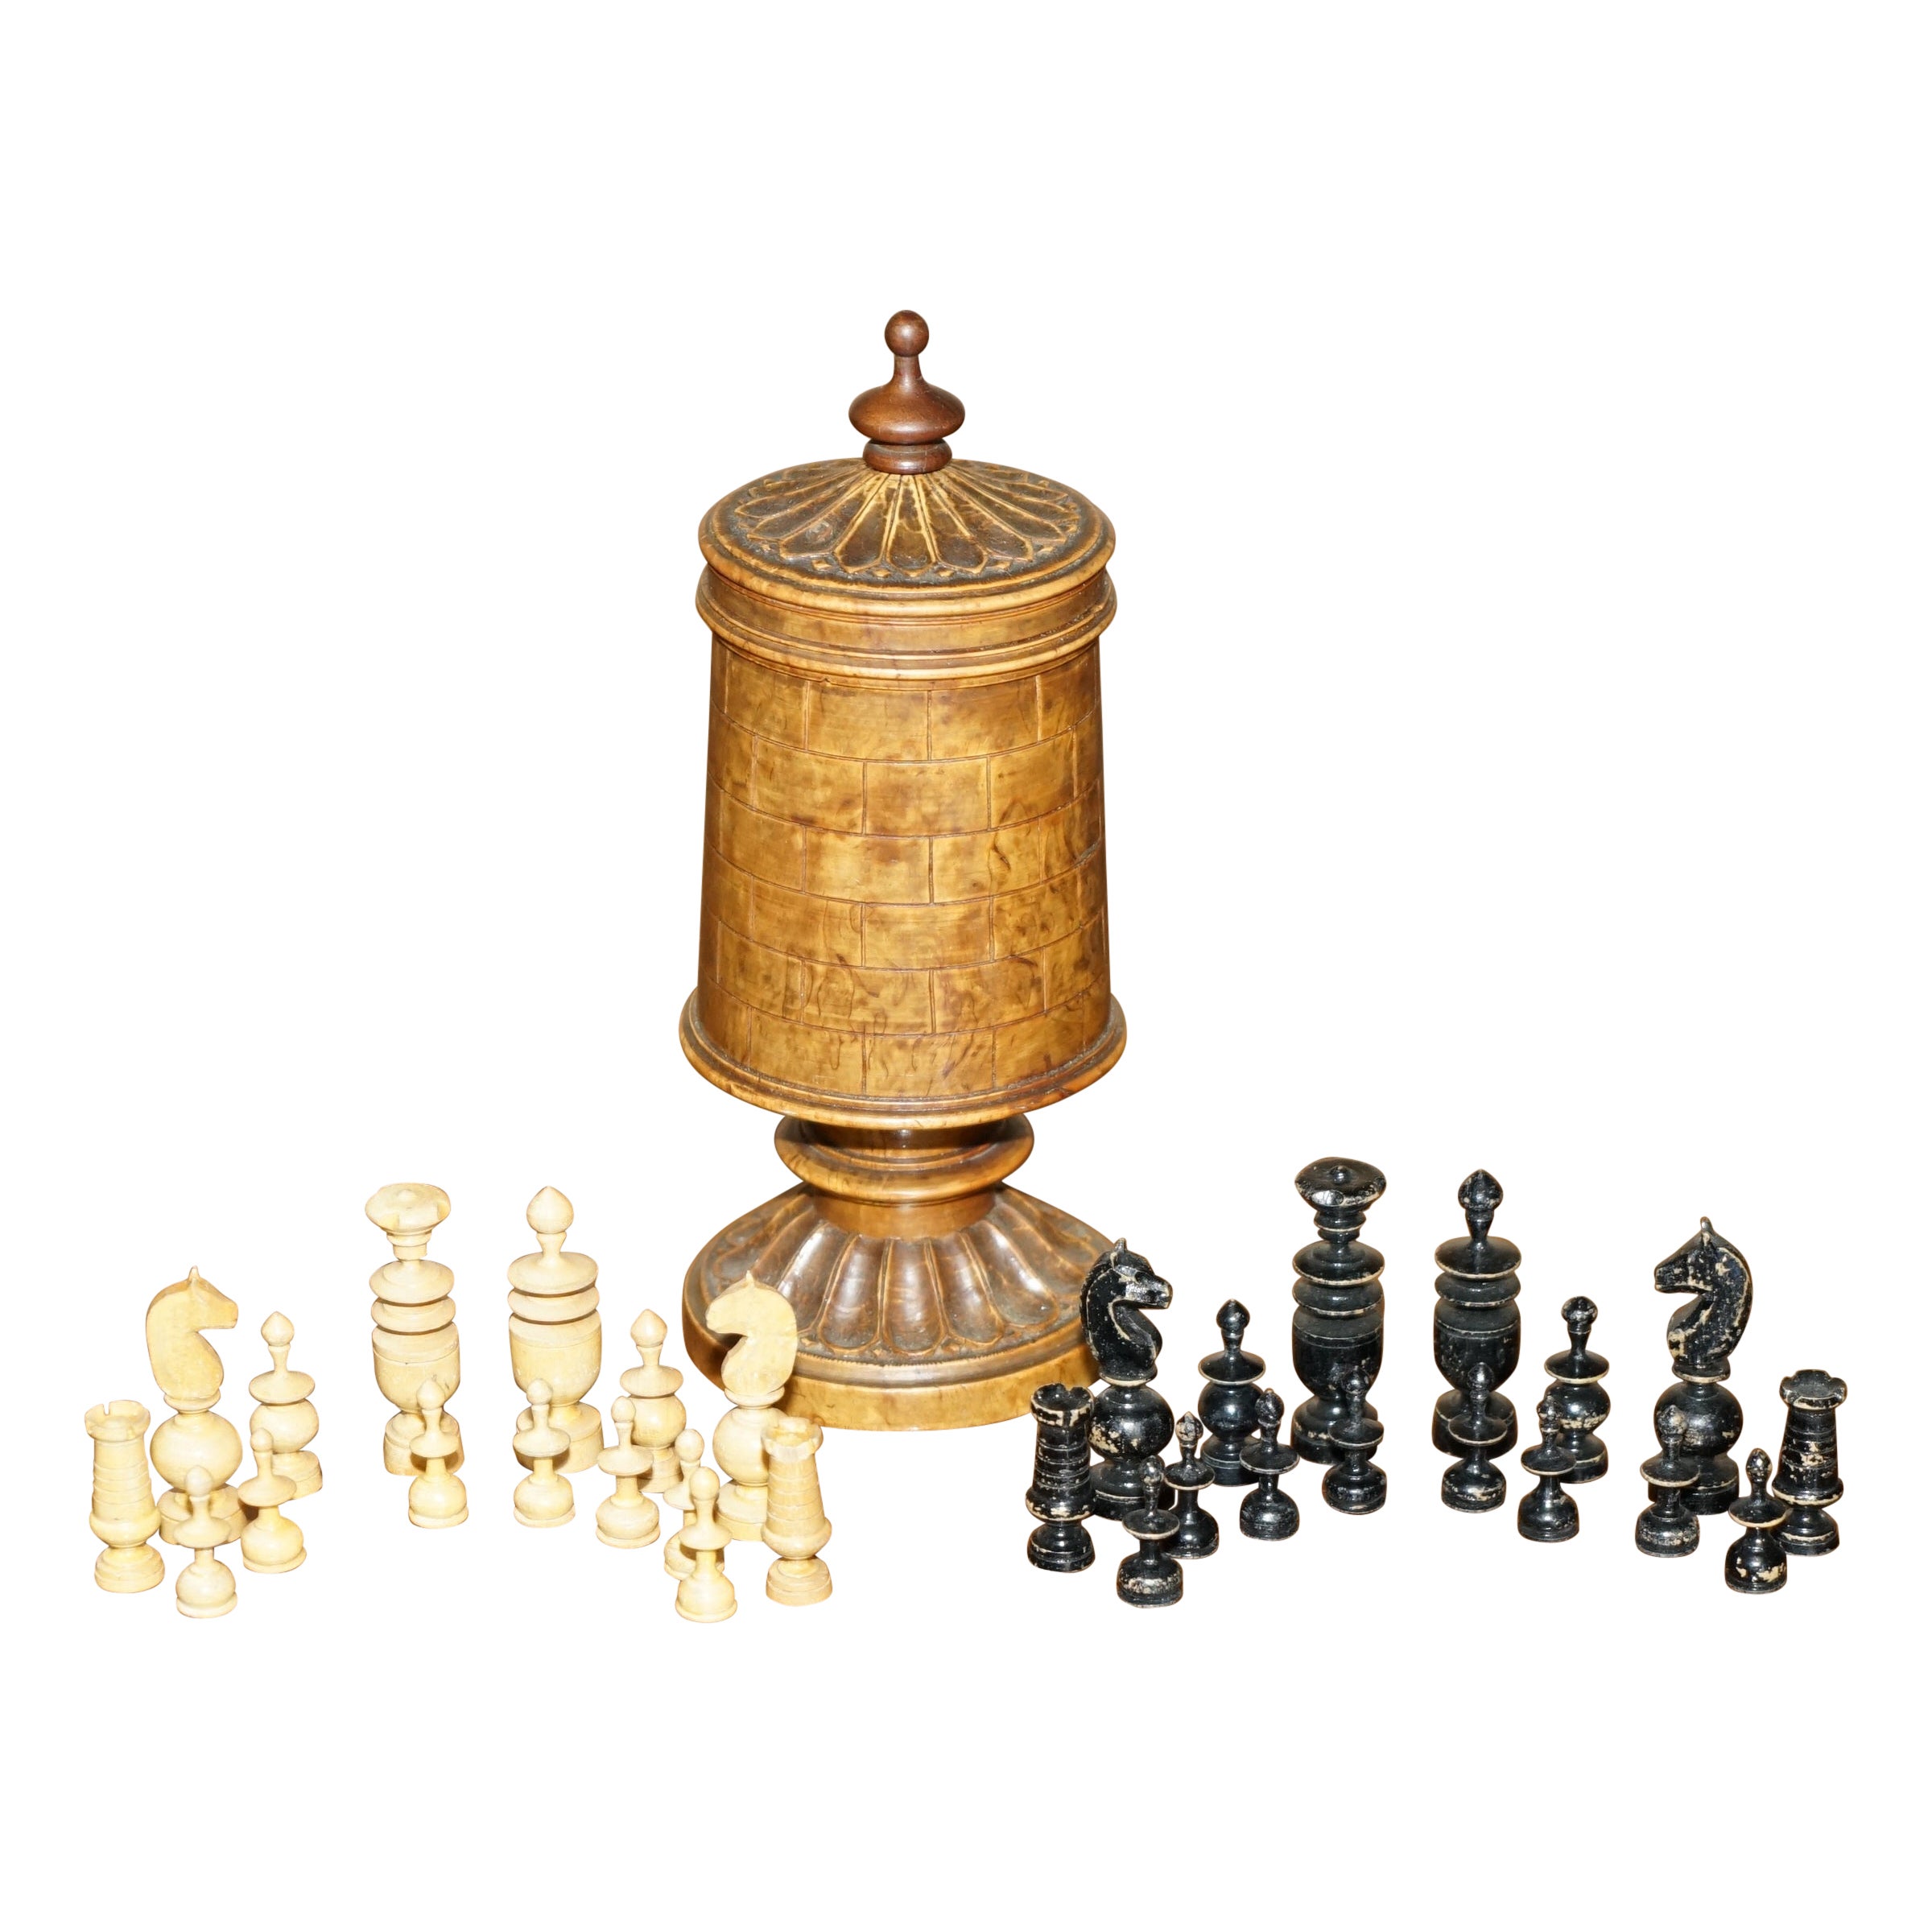 FINE CASTLE TURNED POT HOLDING PERiOD CARVED CHESS SET MUST SEE 18TH CENTURY en vente